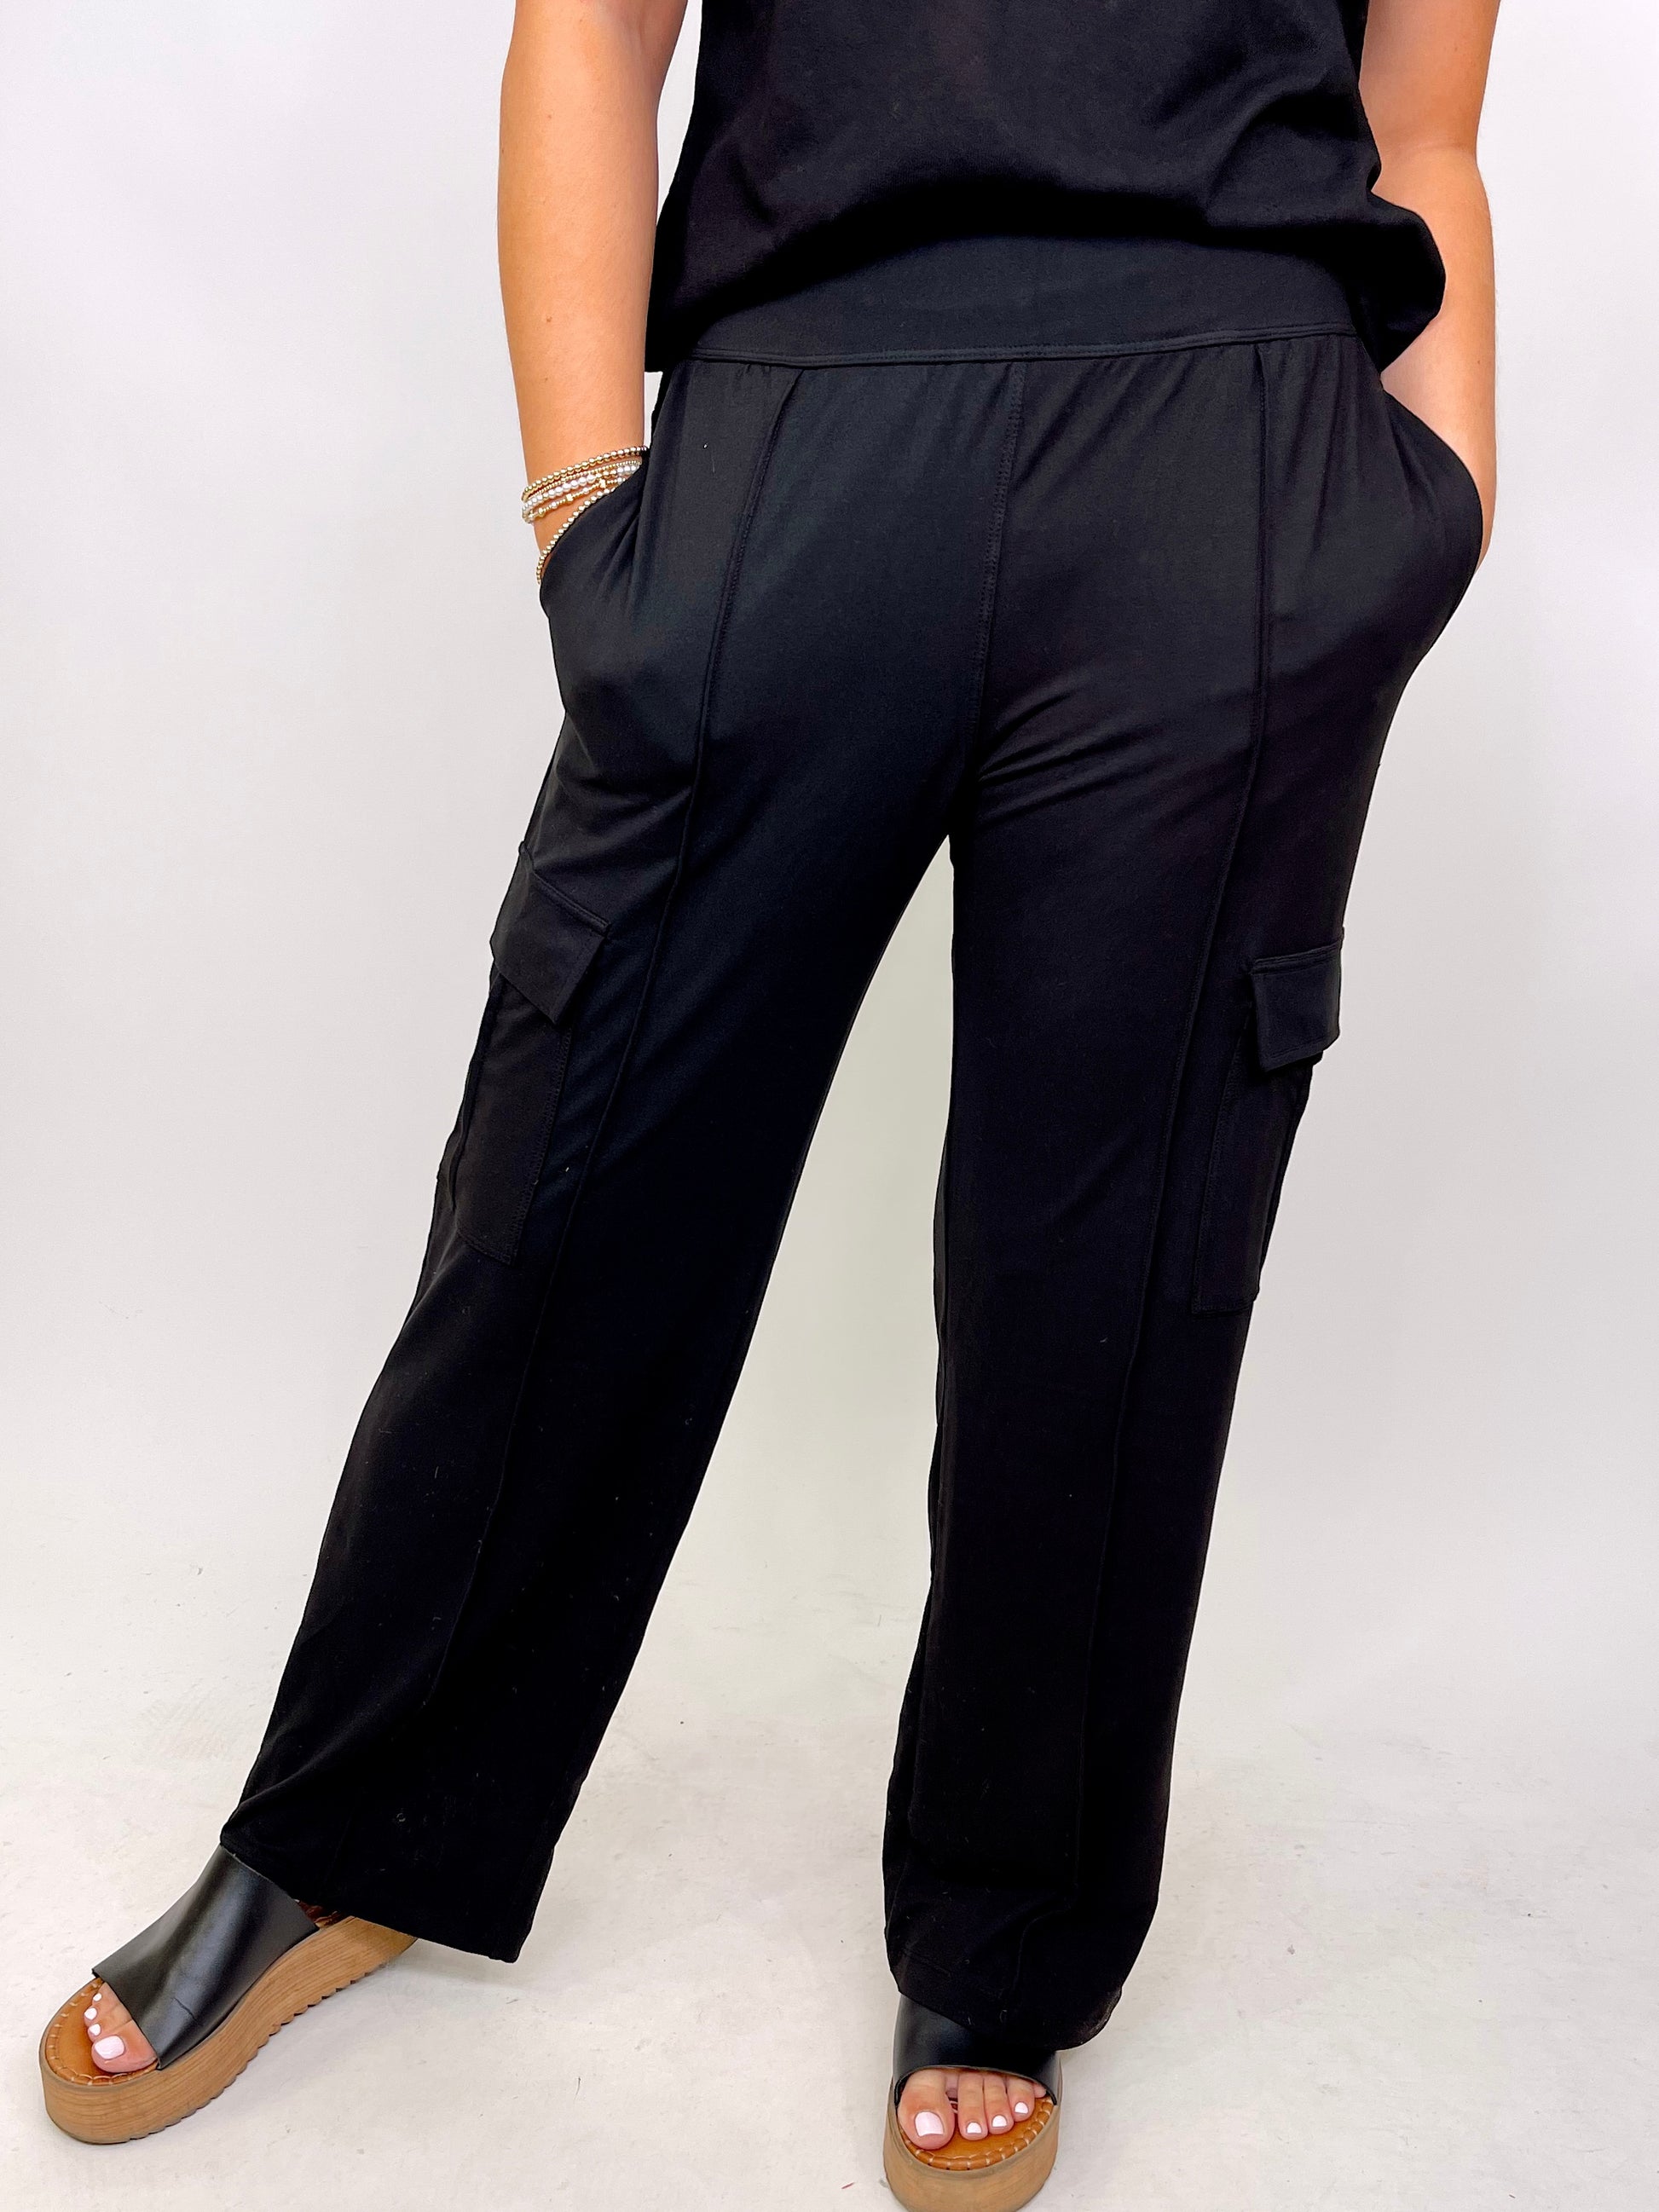 Staycation Lounge Pant-Lounge Pants-Rae Mode-The Village Shoppe, Women’s Fashion Boutique, Shop Online and In Store - Located in Muscle Shoals, AL.